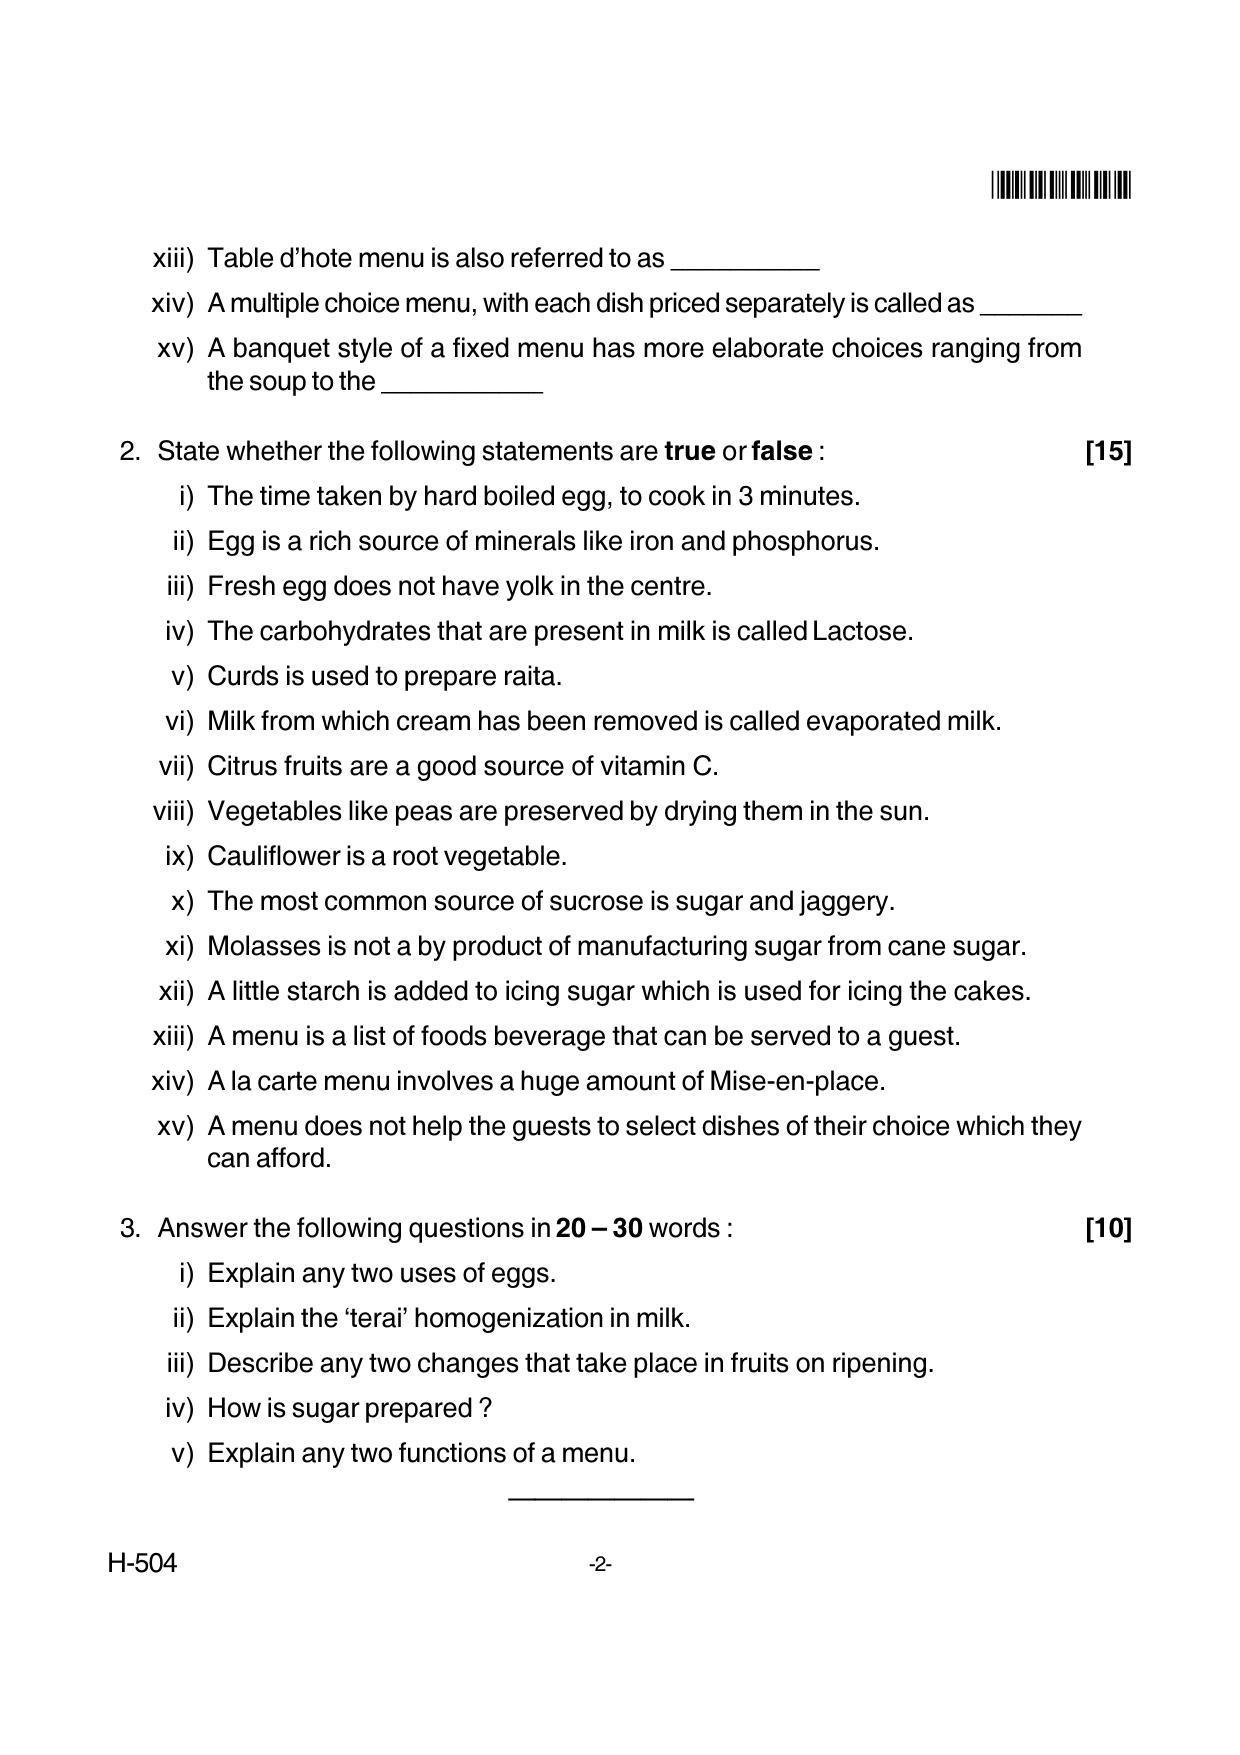 Goa Board Class 12 Cookery  504 New Pattern (March 2018) Question Paper - Page 2